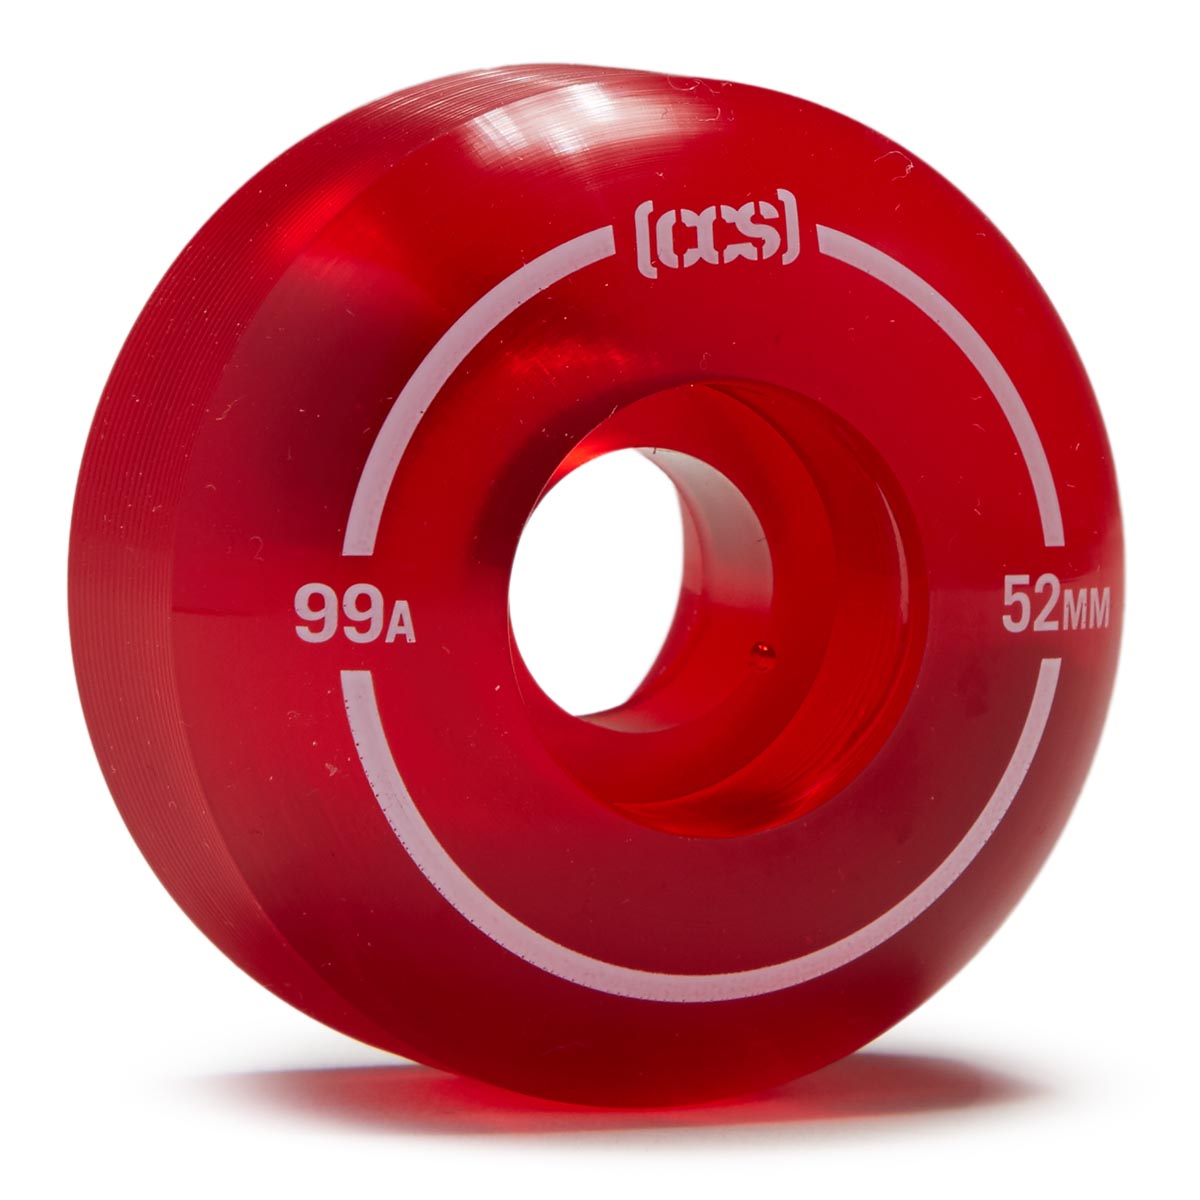 CCS Clear 99a Skateboard Wheels - Red - 52mm image 1